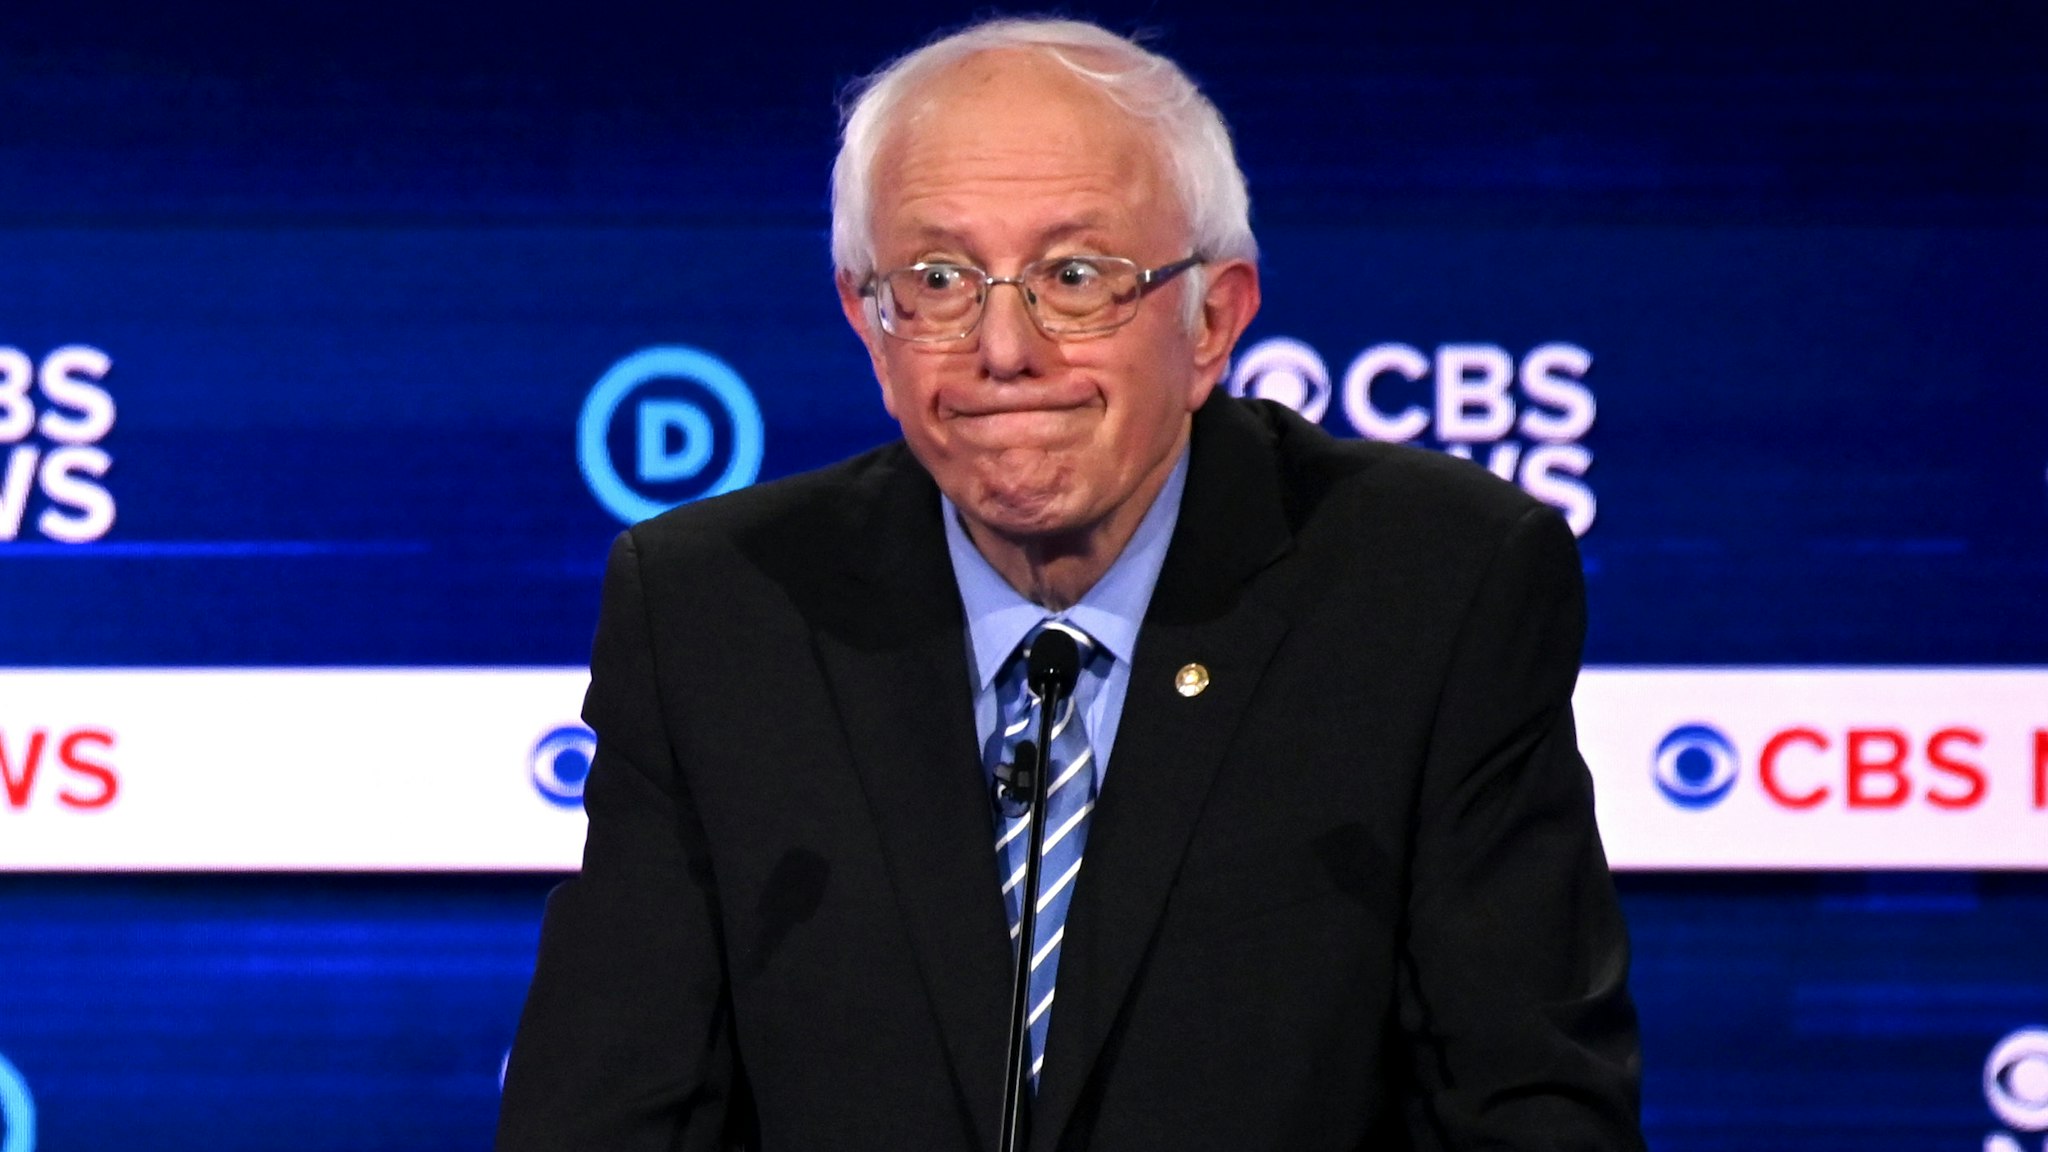 Democratic presidential hopeful Vermont Senator Bernie Sanders participates in the tenth Democratic primary debate of the 2020 presidential campaign season co-hosted by CBS News and the Congressional Black Caucus Institute at the Gaillard Center in Charleston, South Carolina, on February 25, 2020.